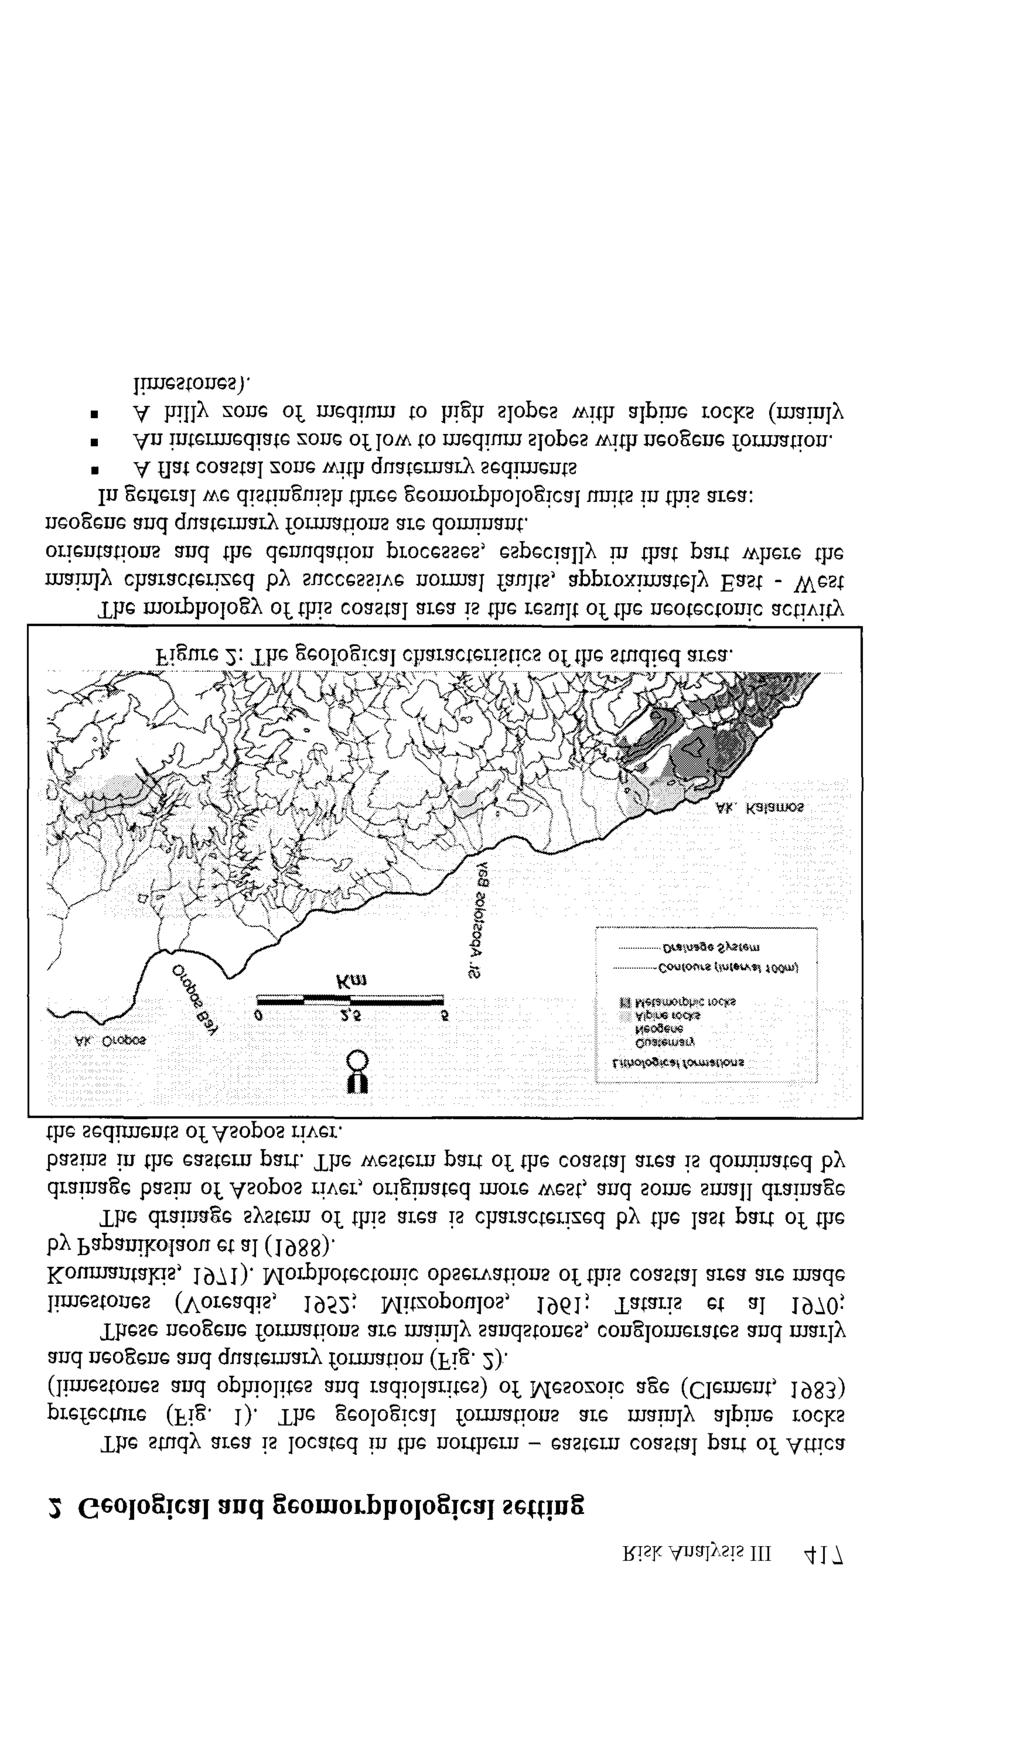 2 Geological and geomorphological setting Risk Analysis III 417 The study area is located in the northern eastern coastal part of Attica prefecture (Fig, 1), The geological formations are mainly